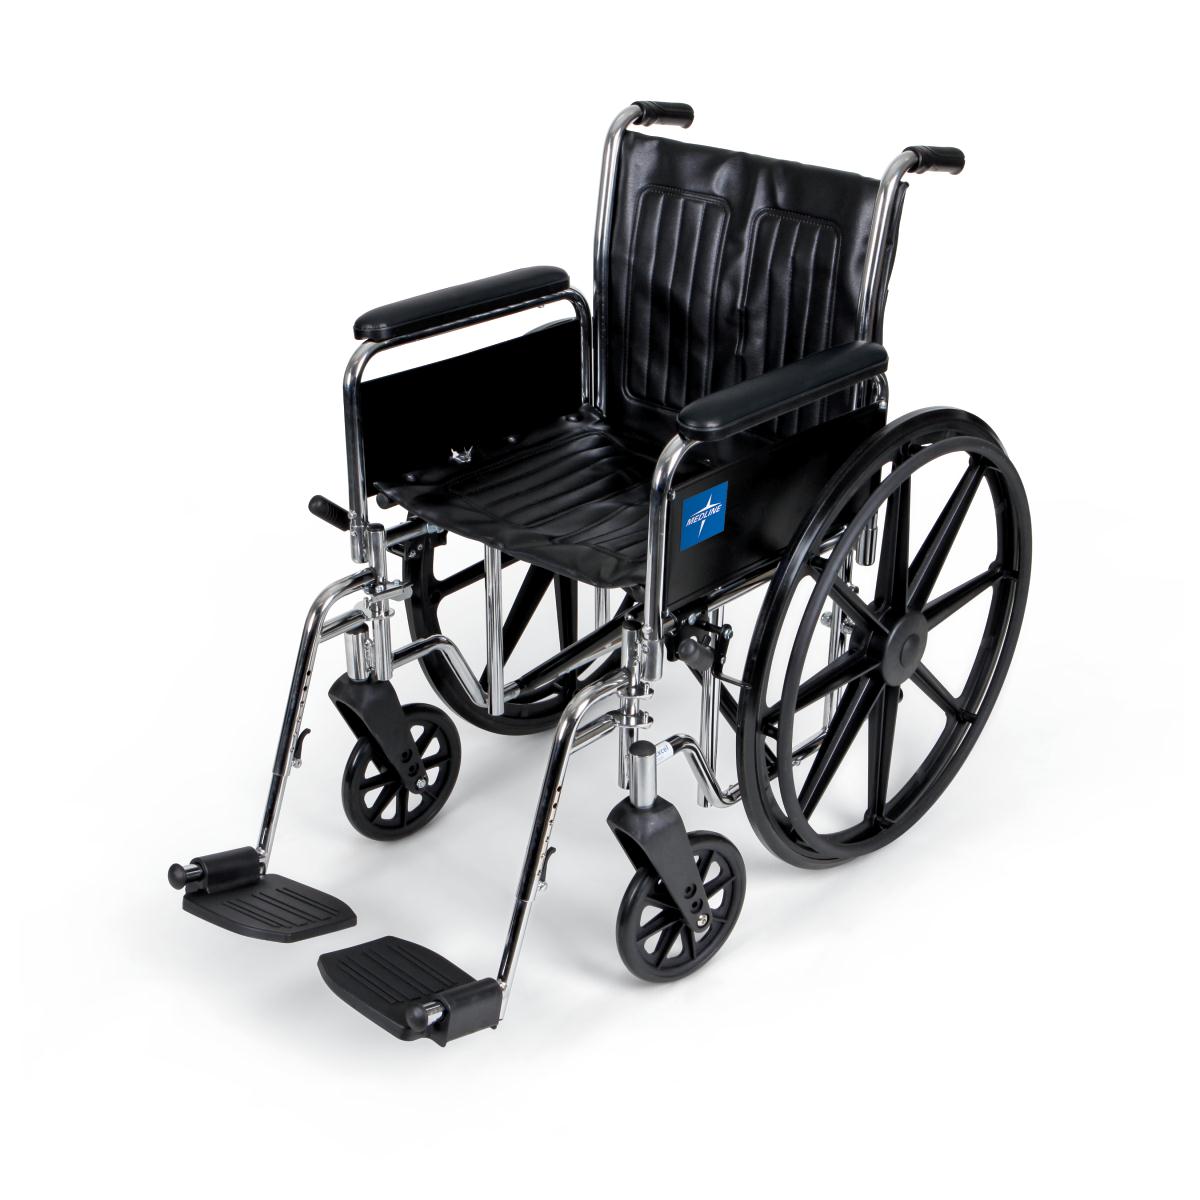 1 Each-Case / 8.00 IN / 24.000 IN Patient Safety & Mobility - MEDLINE - Wasatch Medical Supply